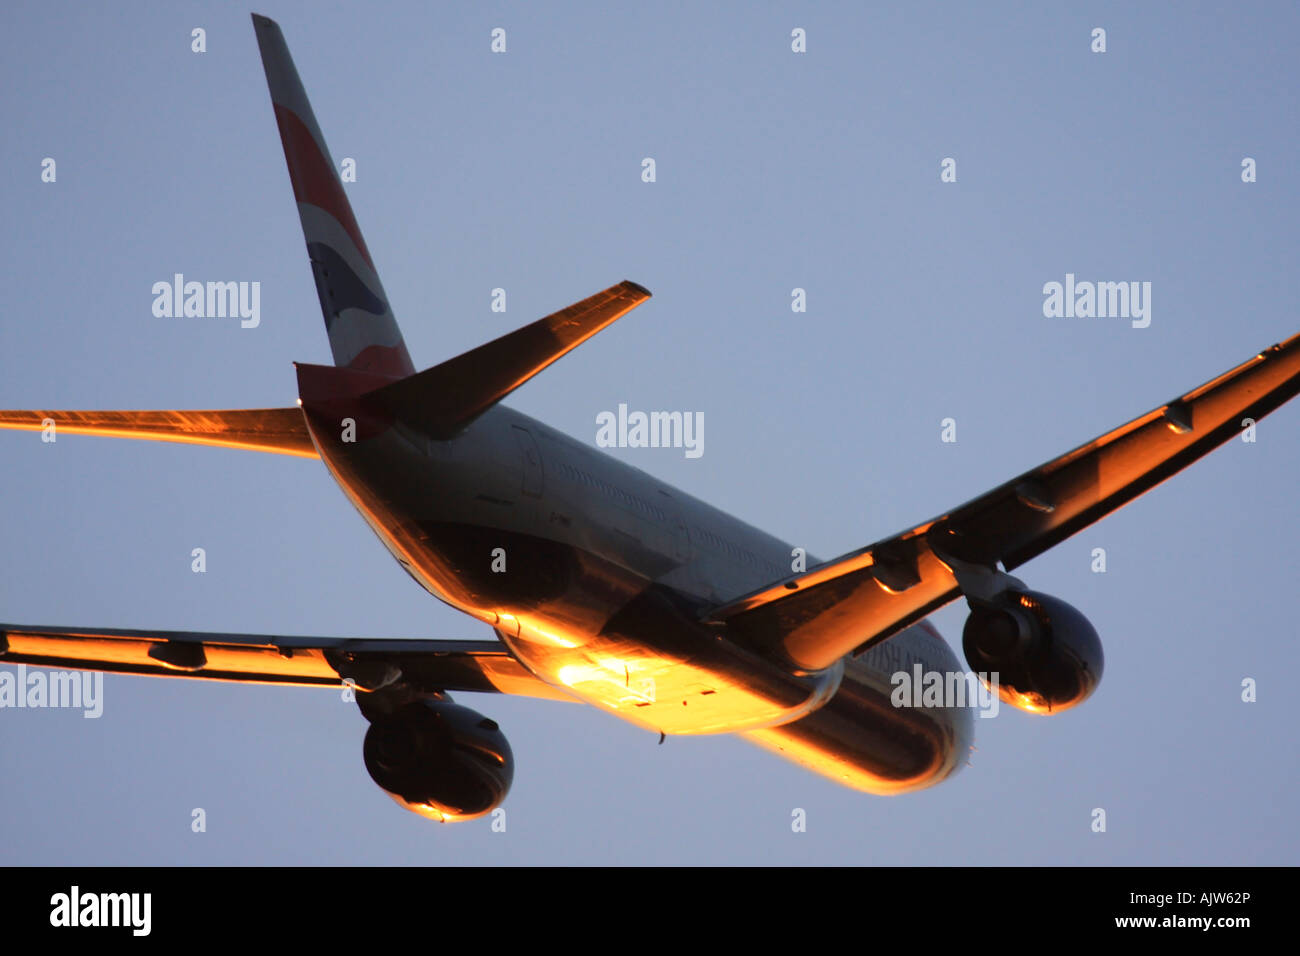 British Airways Boeing 777 just after take off in reflecting sunset light at Heathrow Airport, London, England, UK. Stock Photo